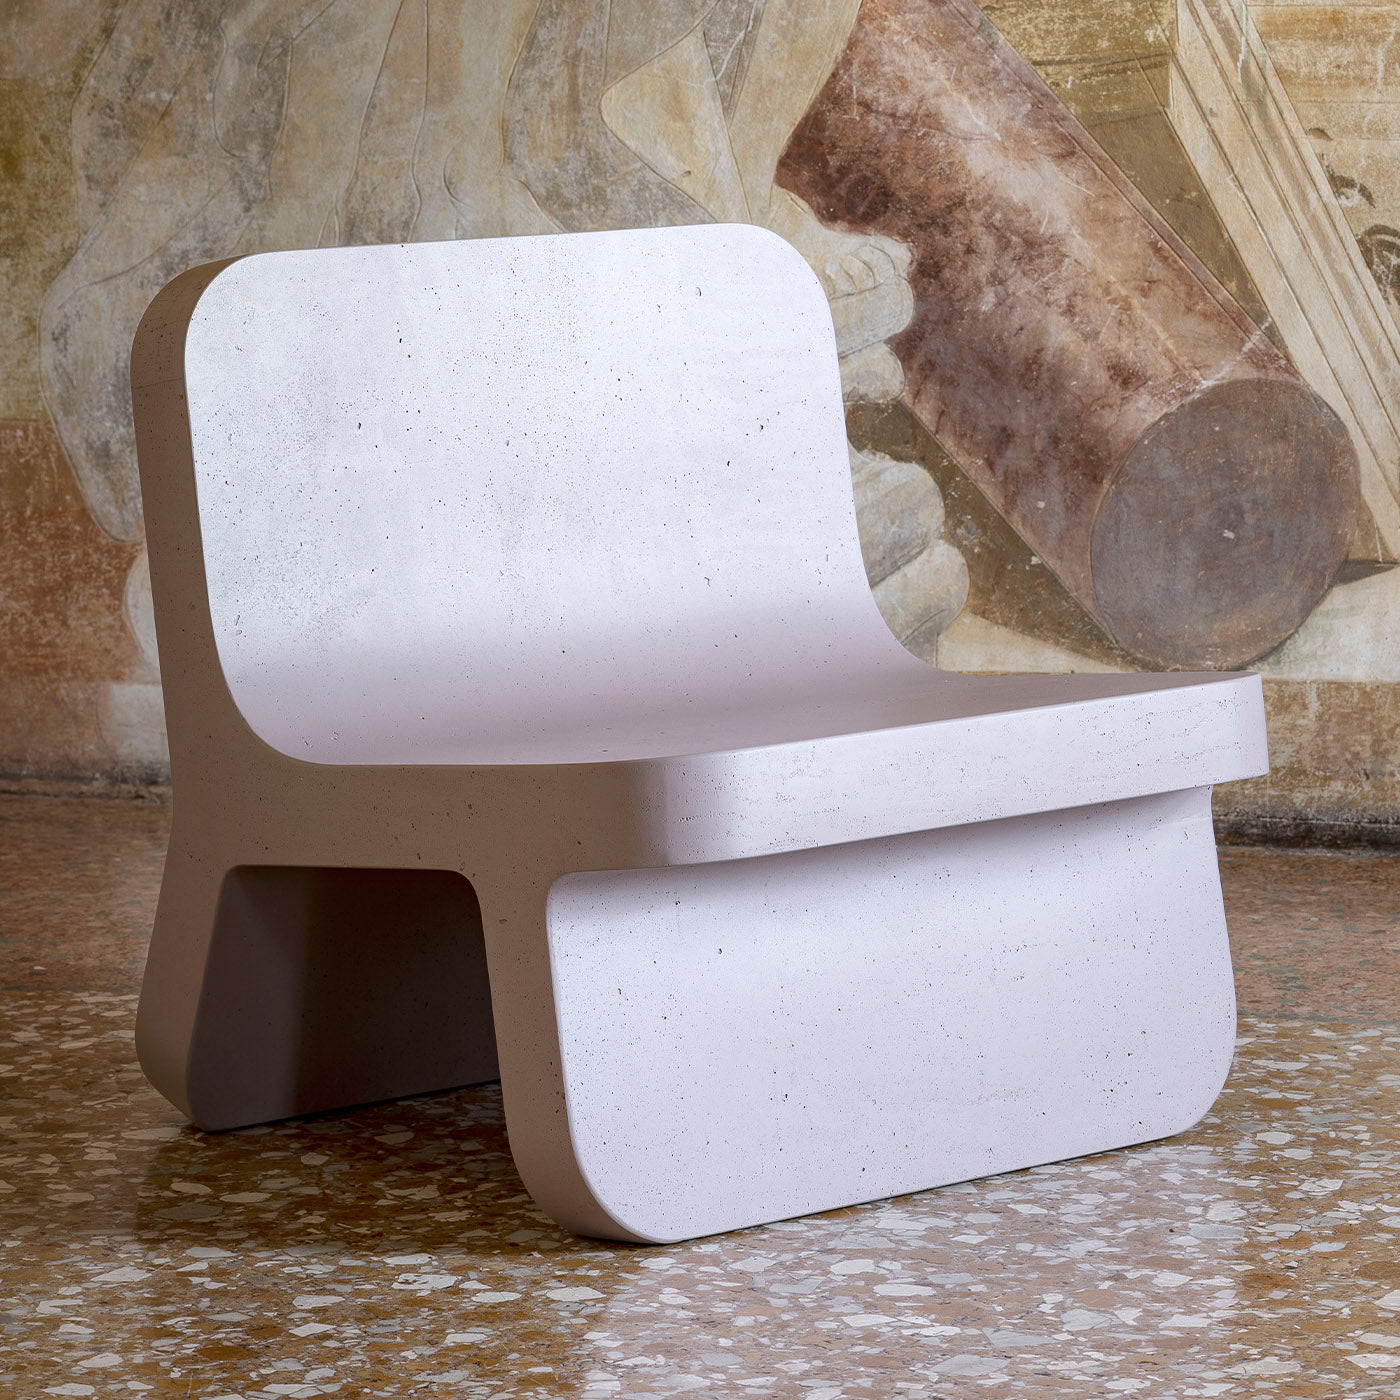 Torcello Lounge Chair by Defne Koz and Marco Susani - Alternative view 5